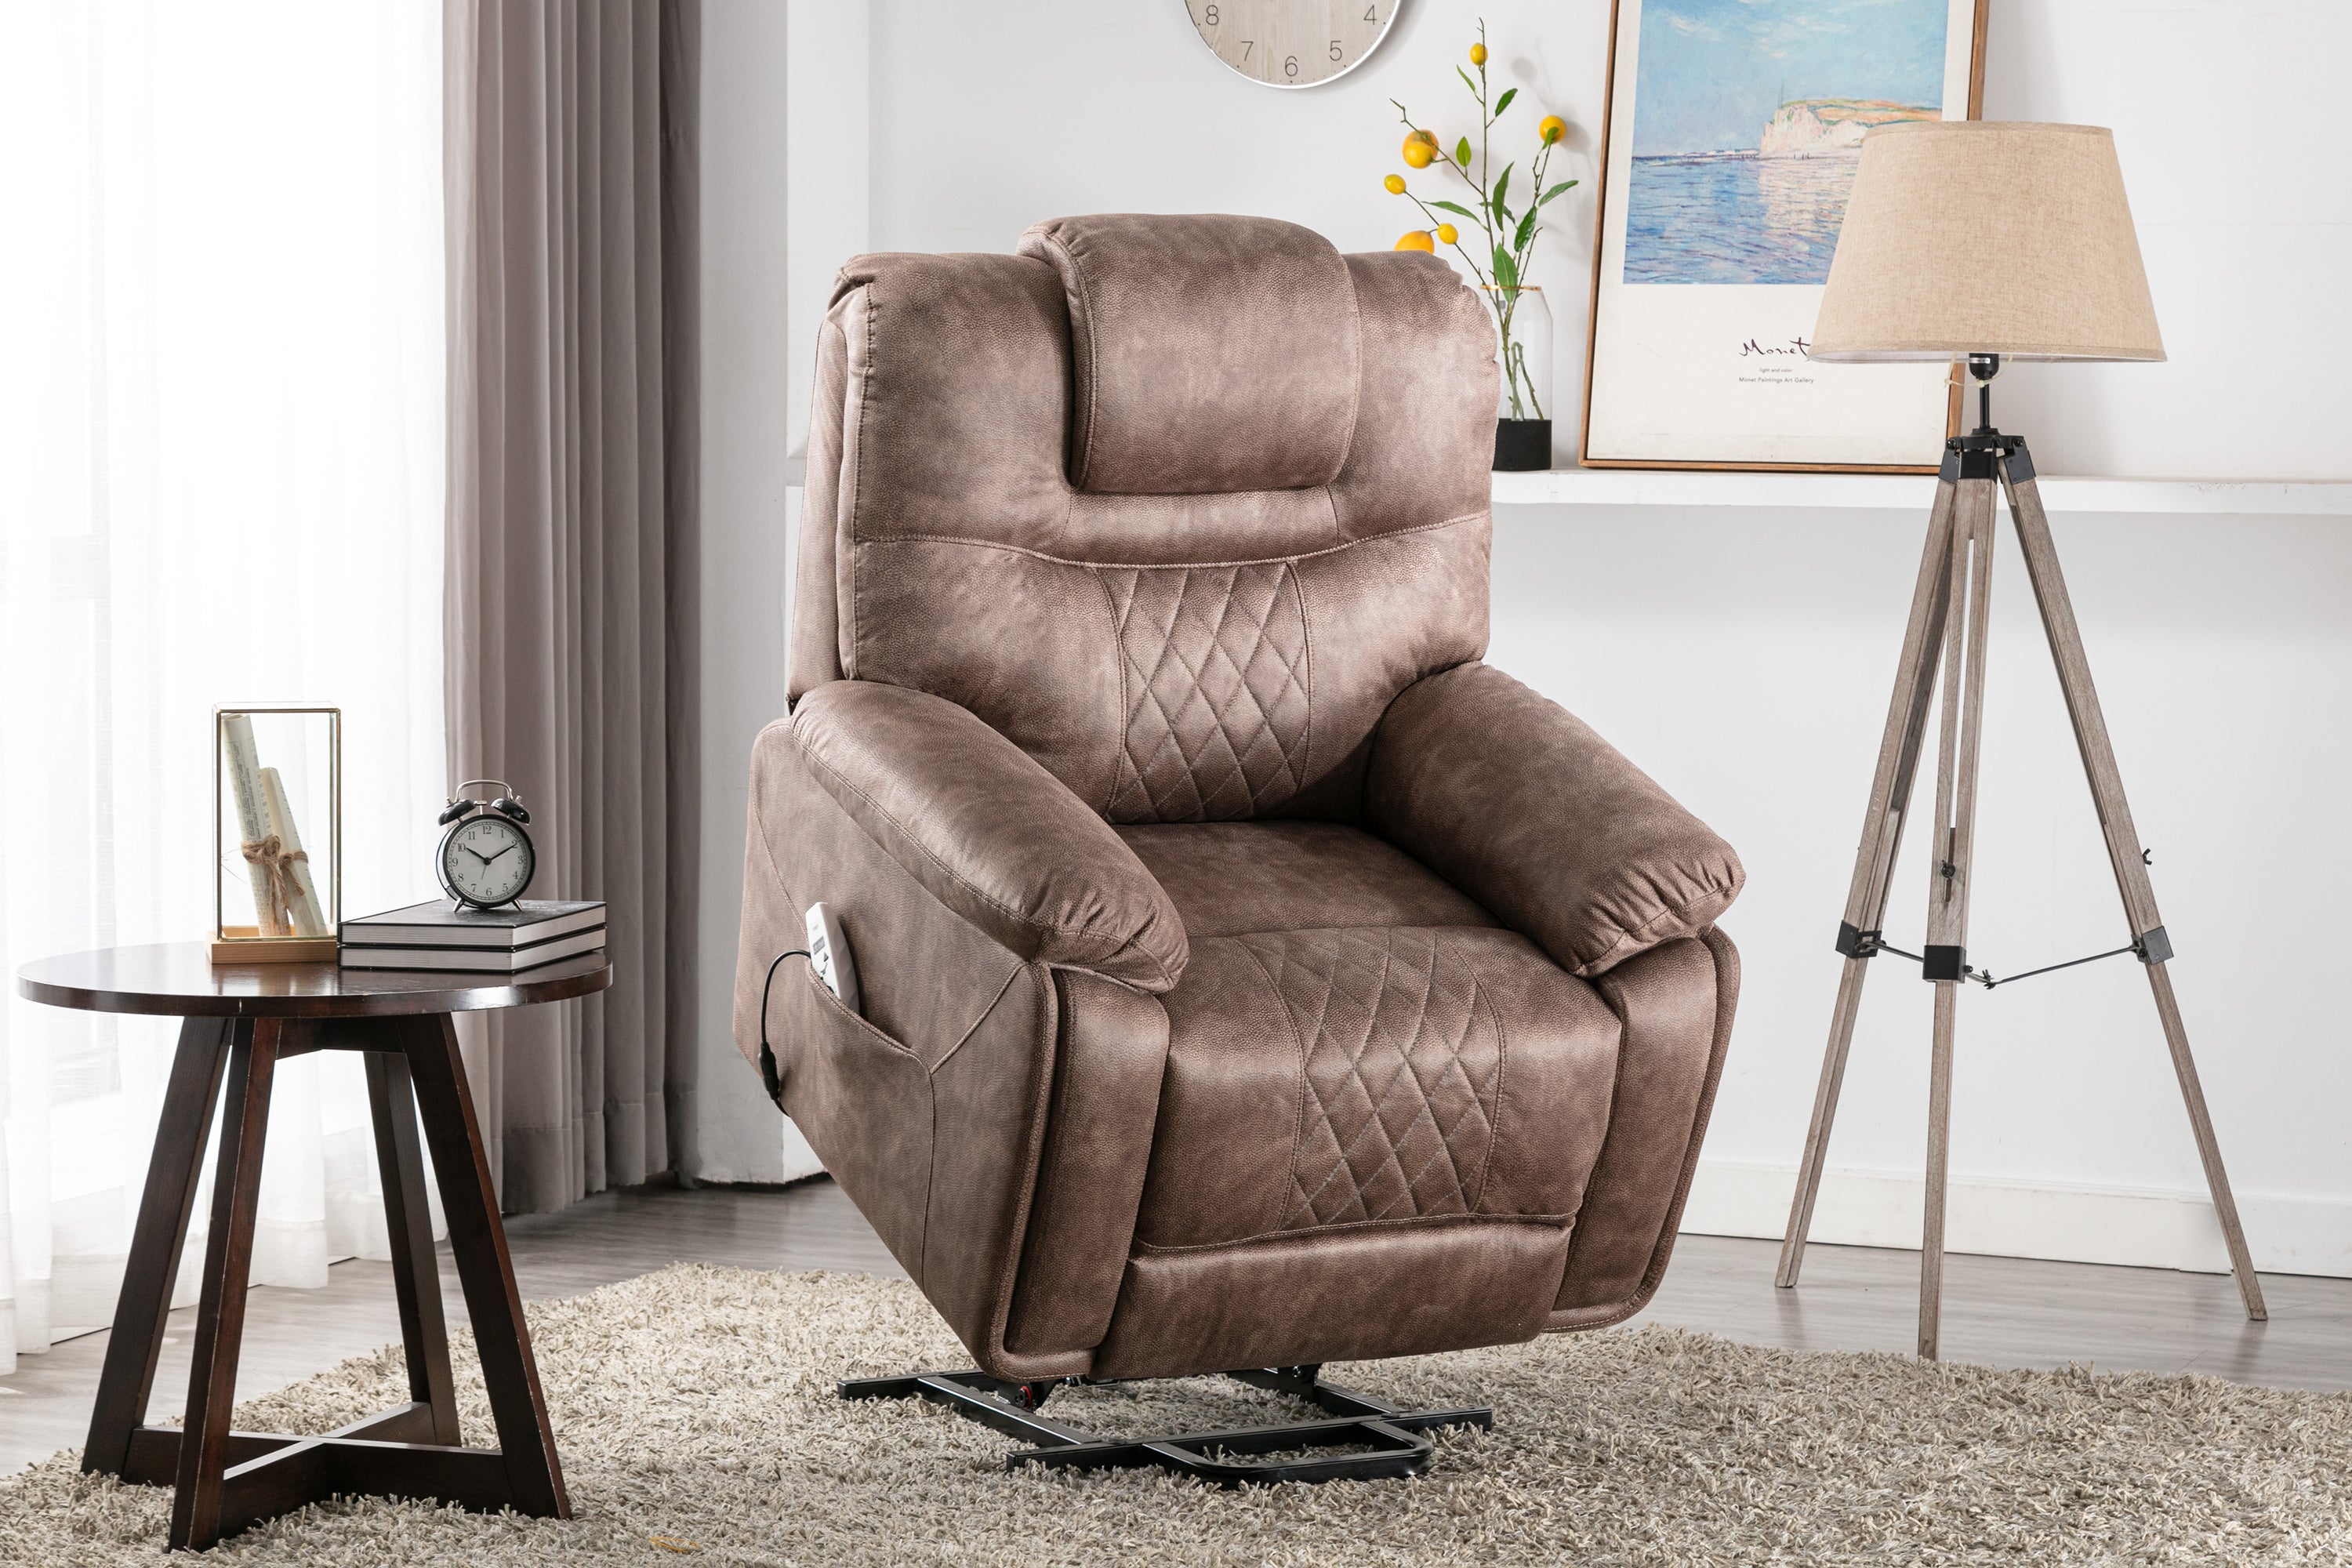 Brown Leather Comfortable Upholstery Power Lift Chair By: Alabama Beds